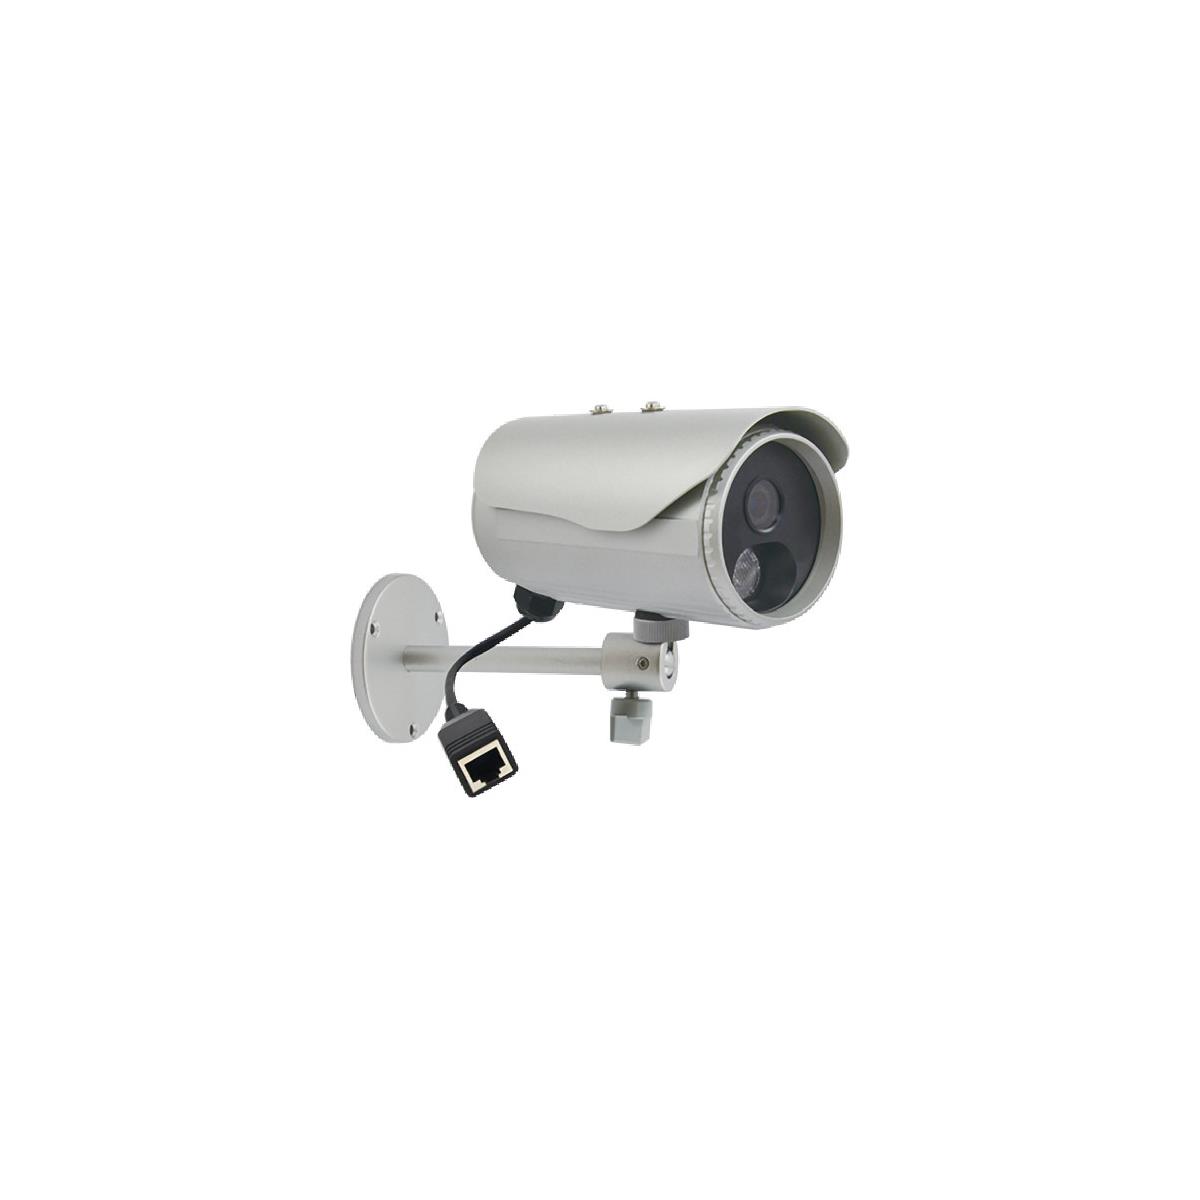 Image of ACTi D31 Day/Night Outdoor IP Bullet Camera